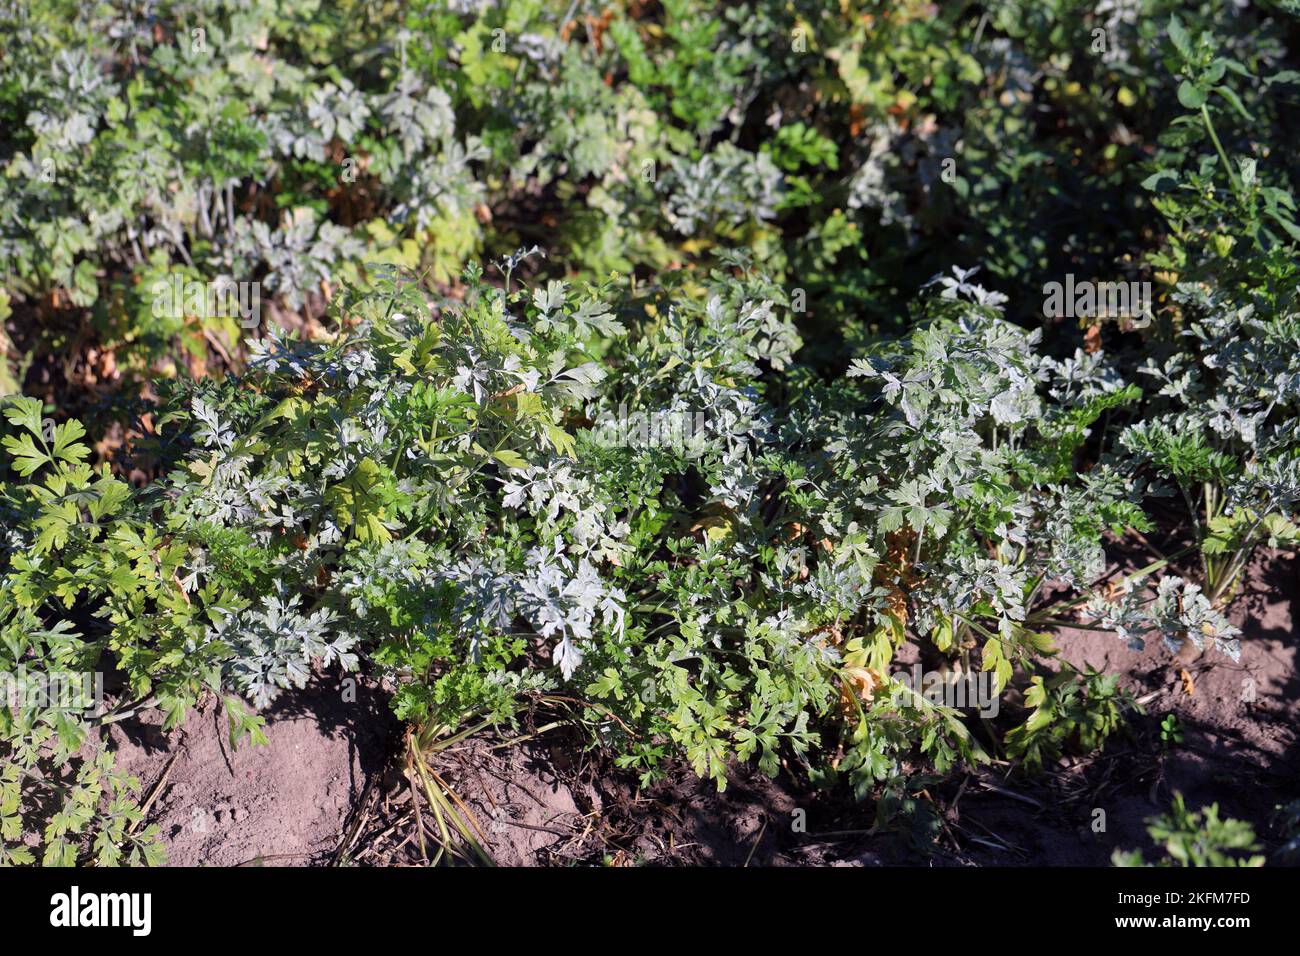 Powdery mildew on the parsley leaf. This is a dangerous plant disease that causes yield losses. Stock Photo